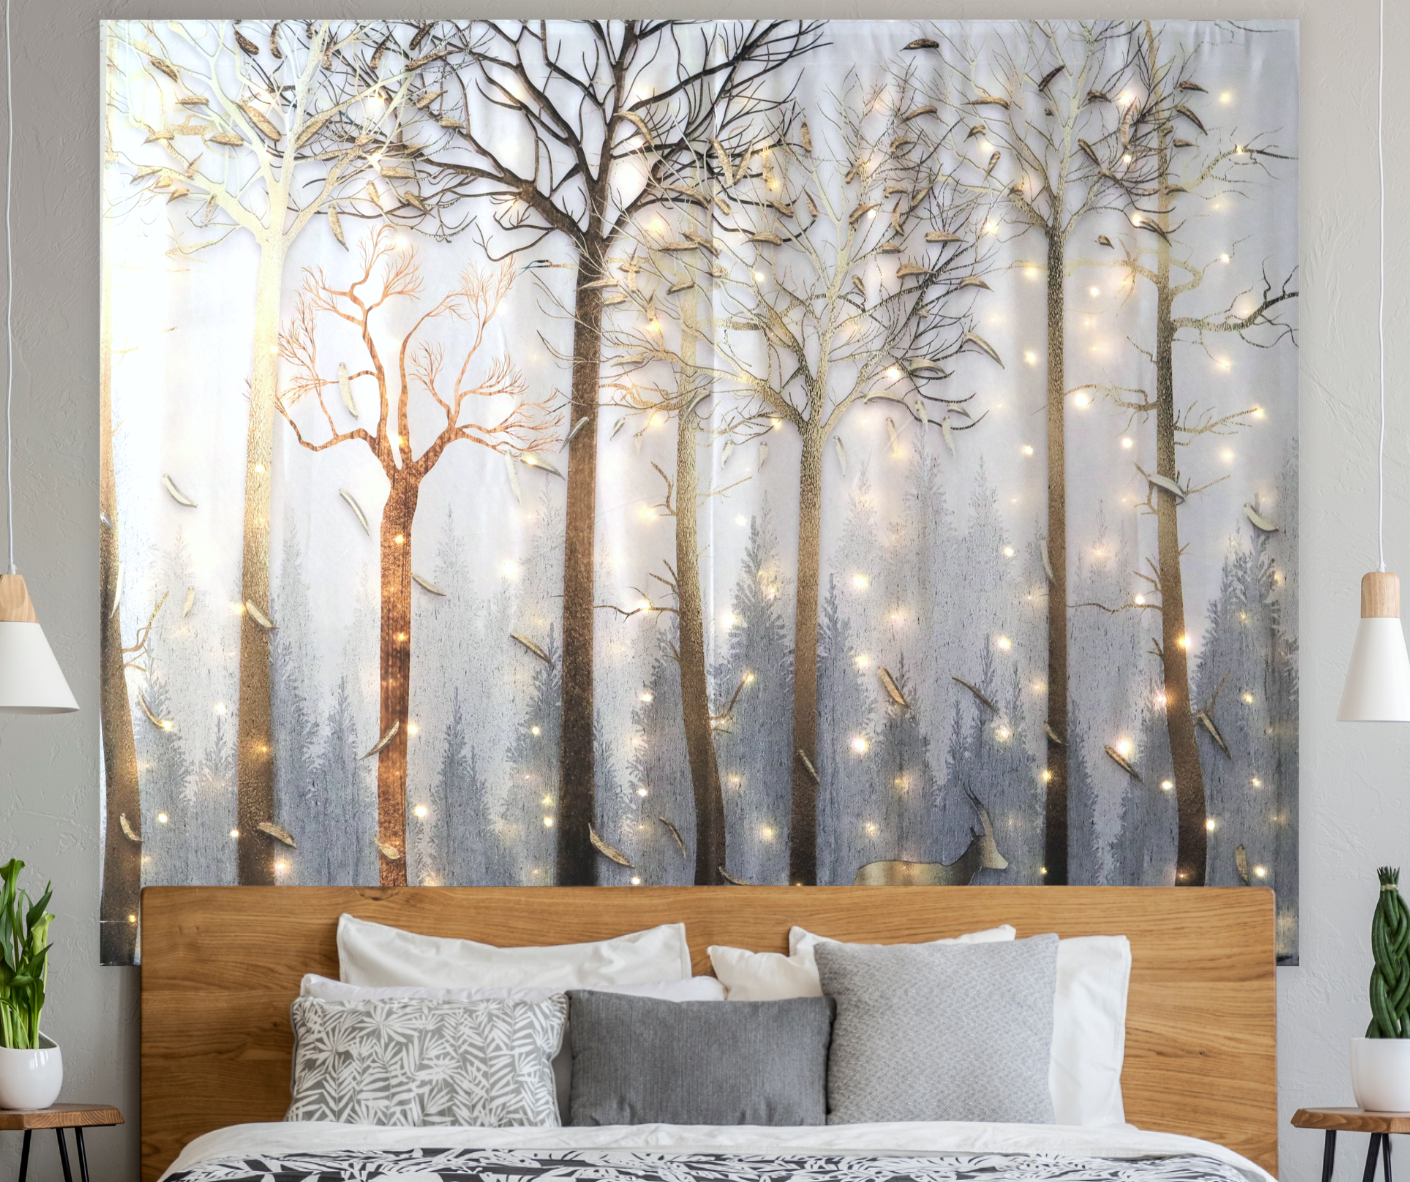 KaiSha LED Tapestry Wall Hanging; Modern Abstract Trees Scenic View Art Décor Home Decoration Bedroom Forest Nature Landscape Scene